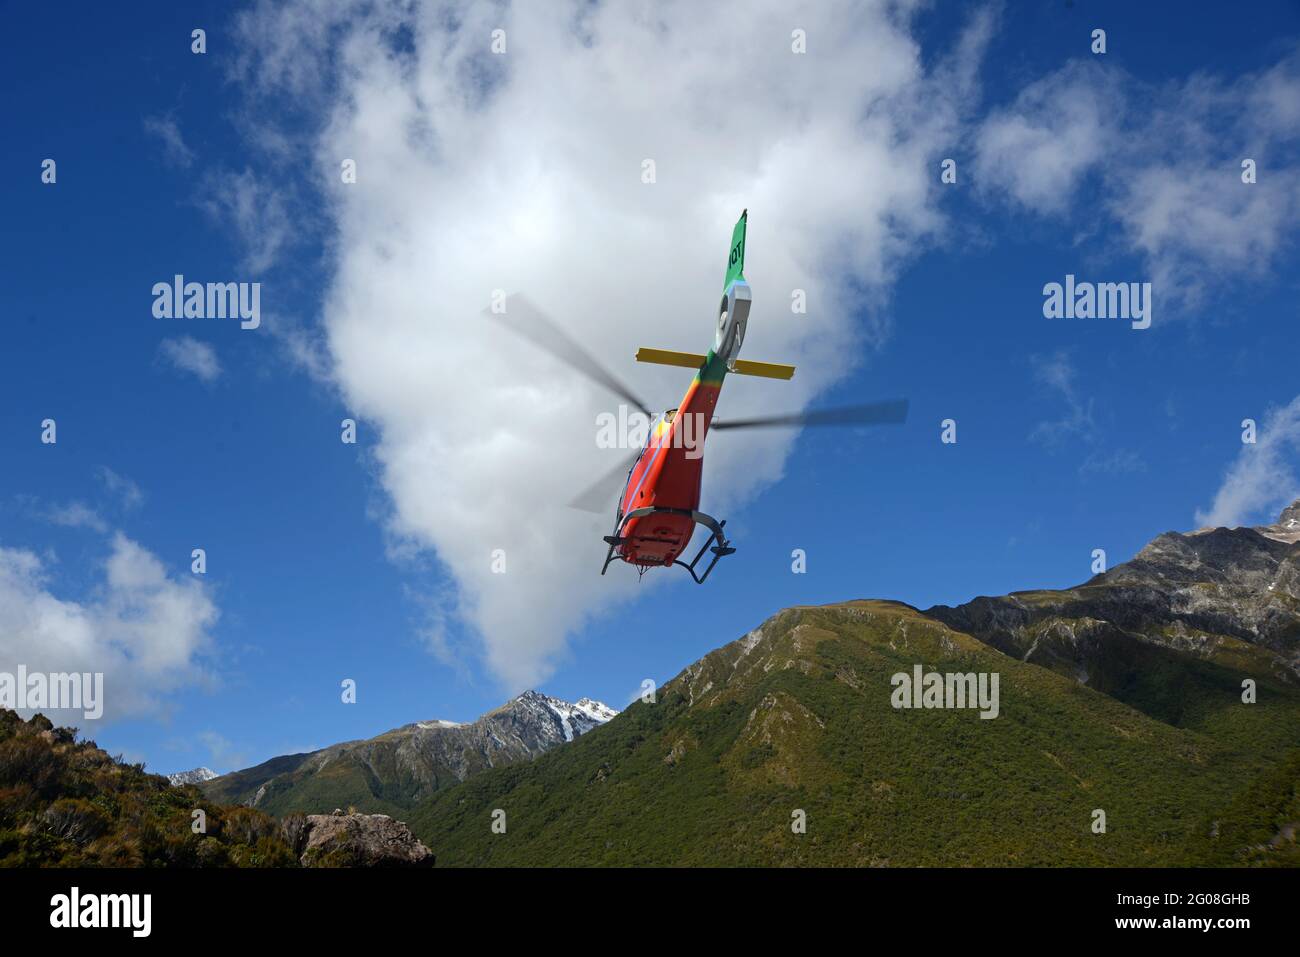 ARTHURS PASS, NEW ZEALAND, 2021-01-29: A brightly painted helicopter takes off from a car park in Arthur's Pass National Park, New Zealand Stock Photo